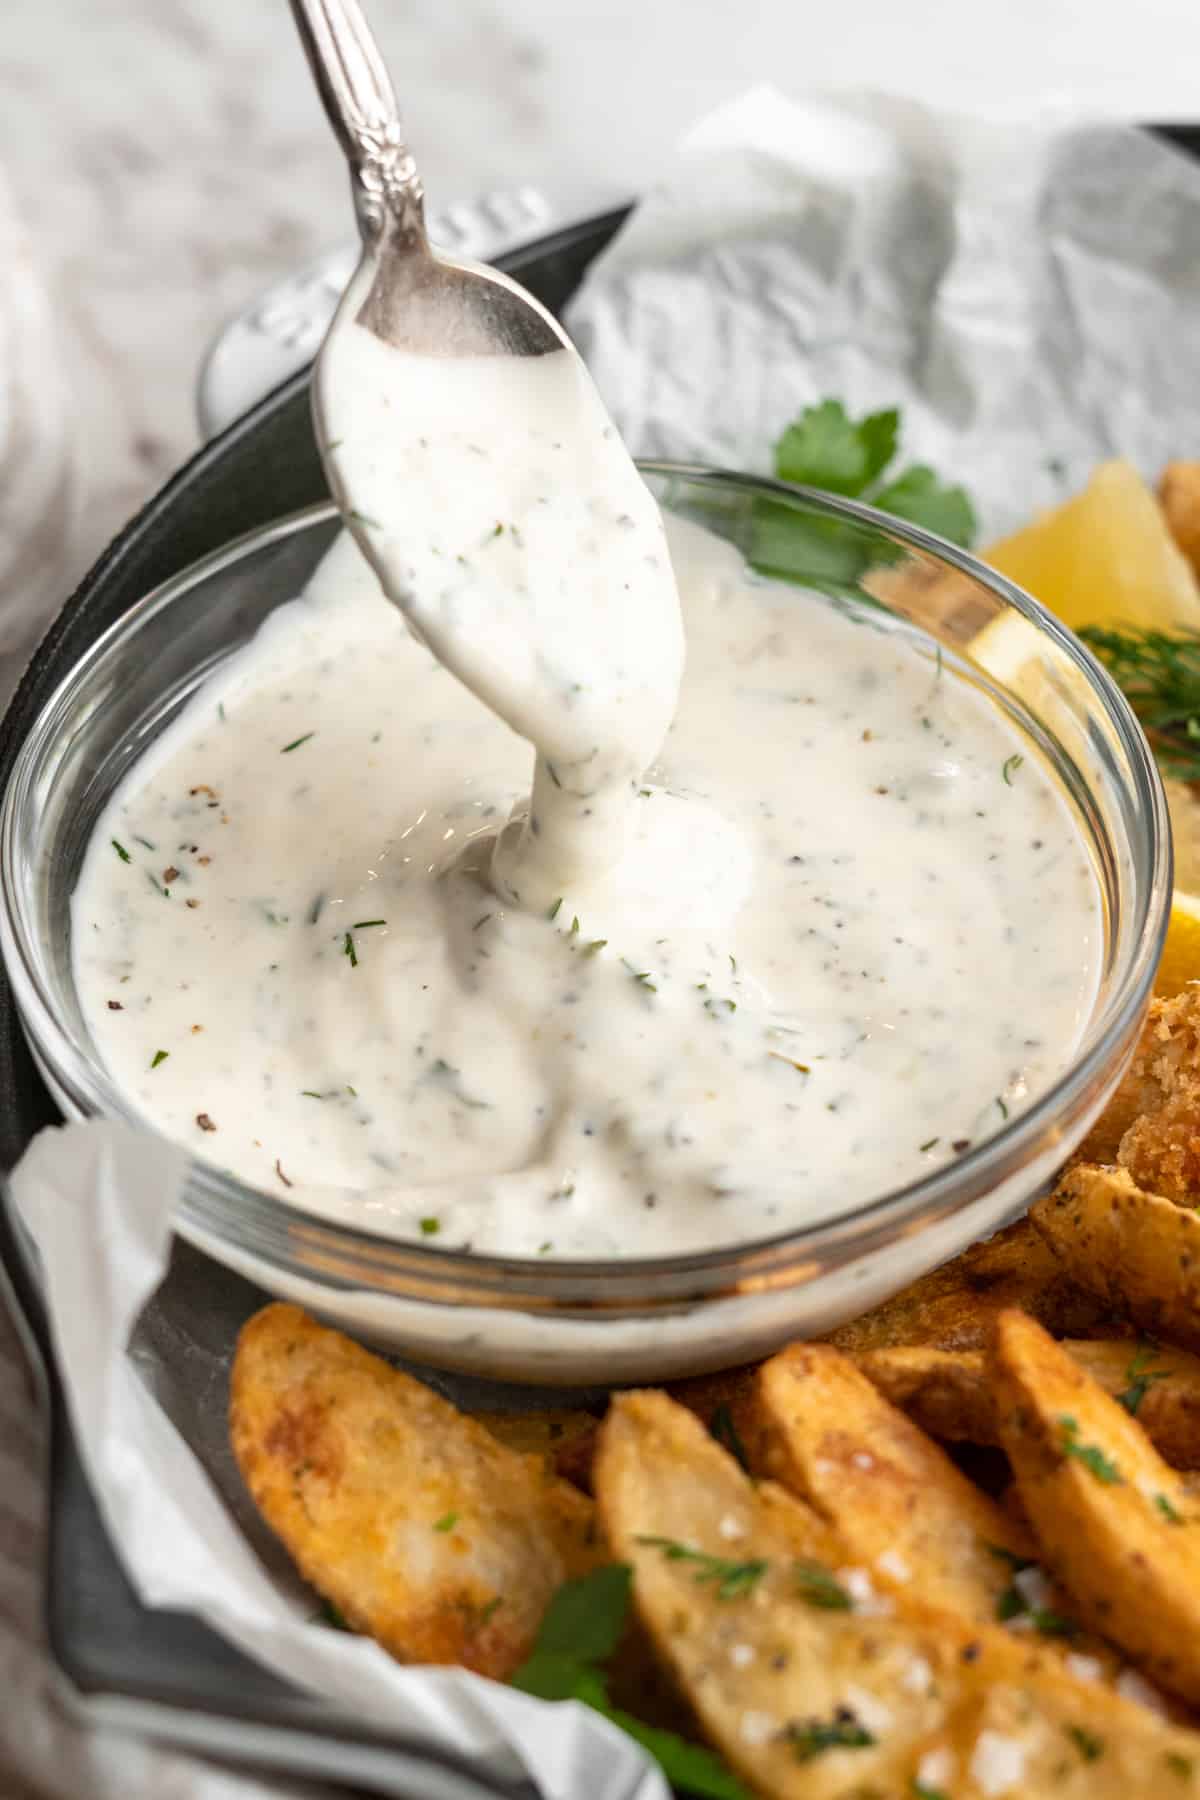 Spoon drizzling vegan tartar sauce back into bowl to show thick texture